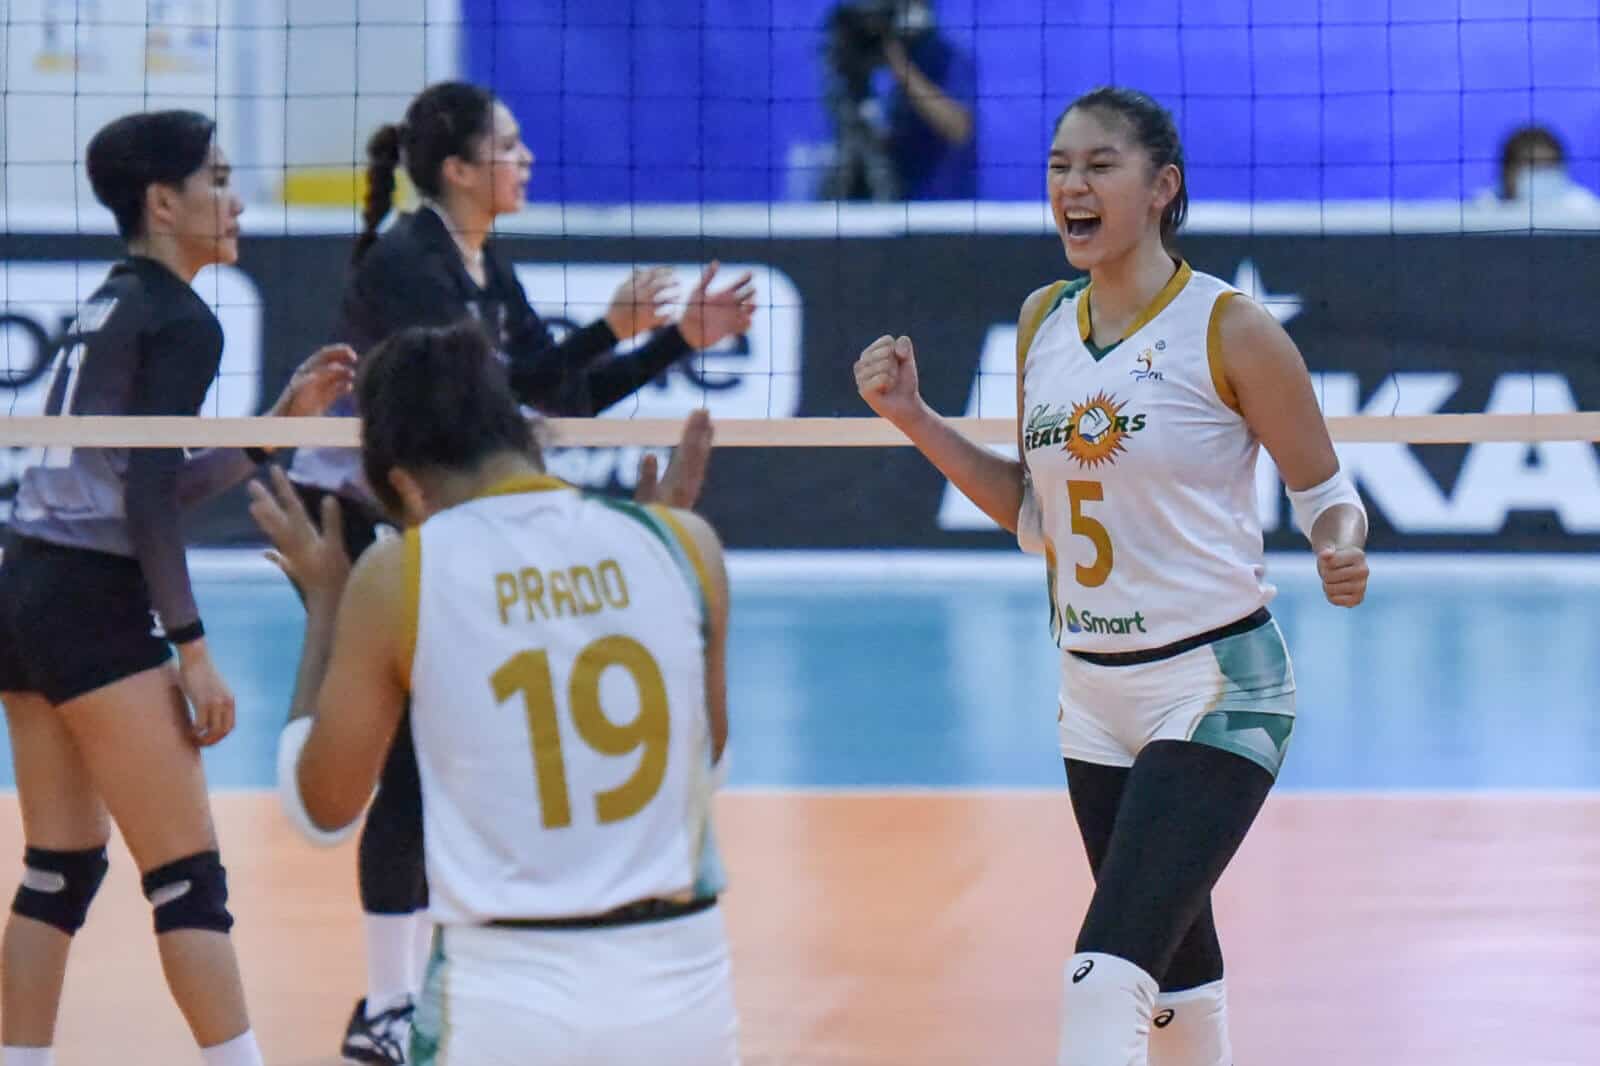 A group of female volleyball players, including top blocker Mika Reyes, celebrating a goal as PLDT caps off their recruitment spree.